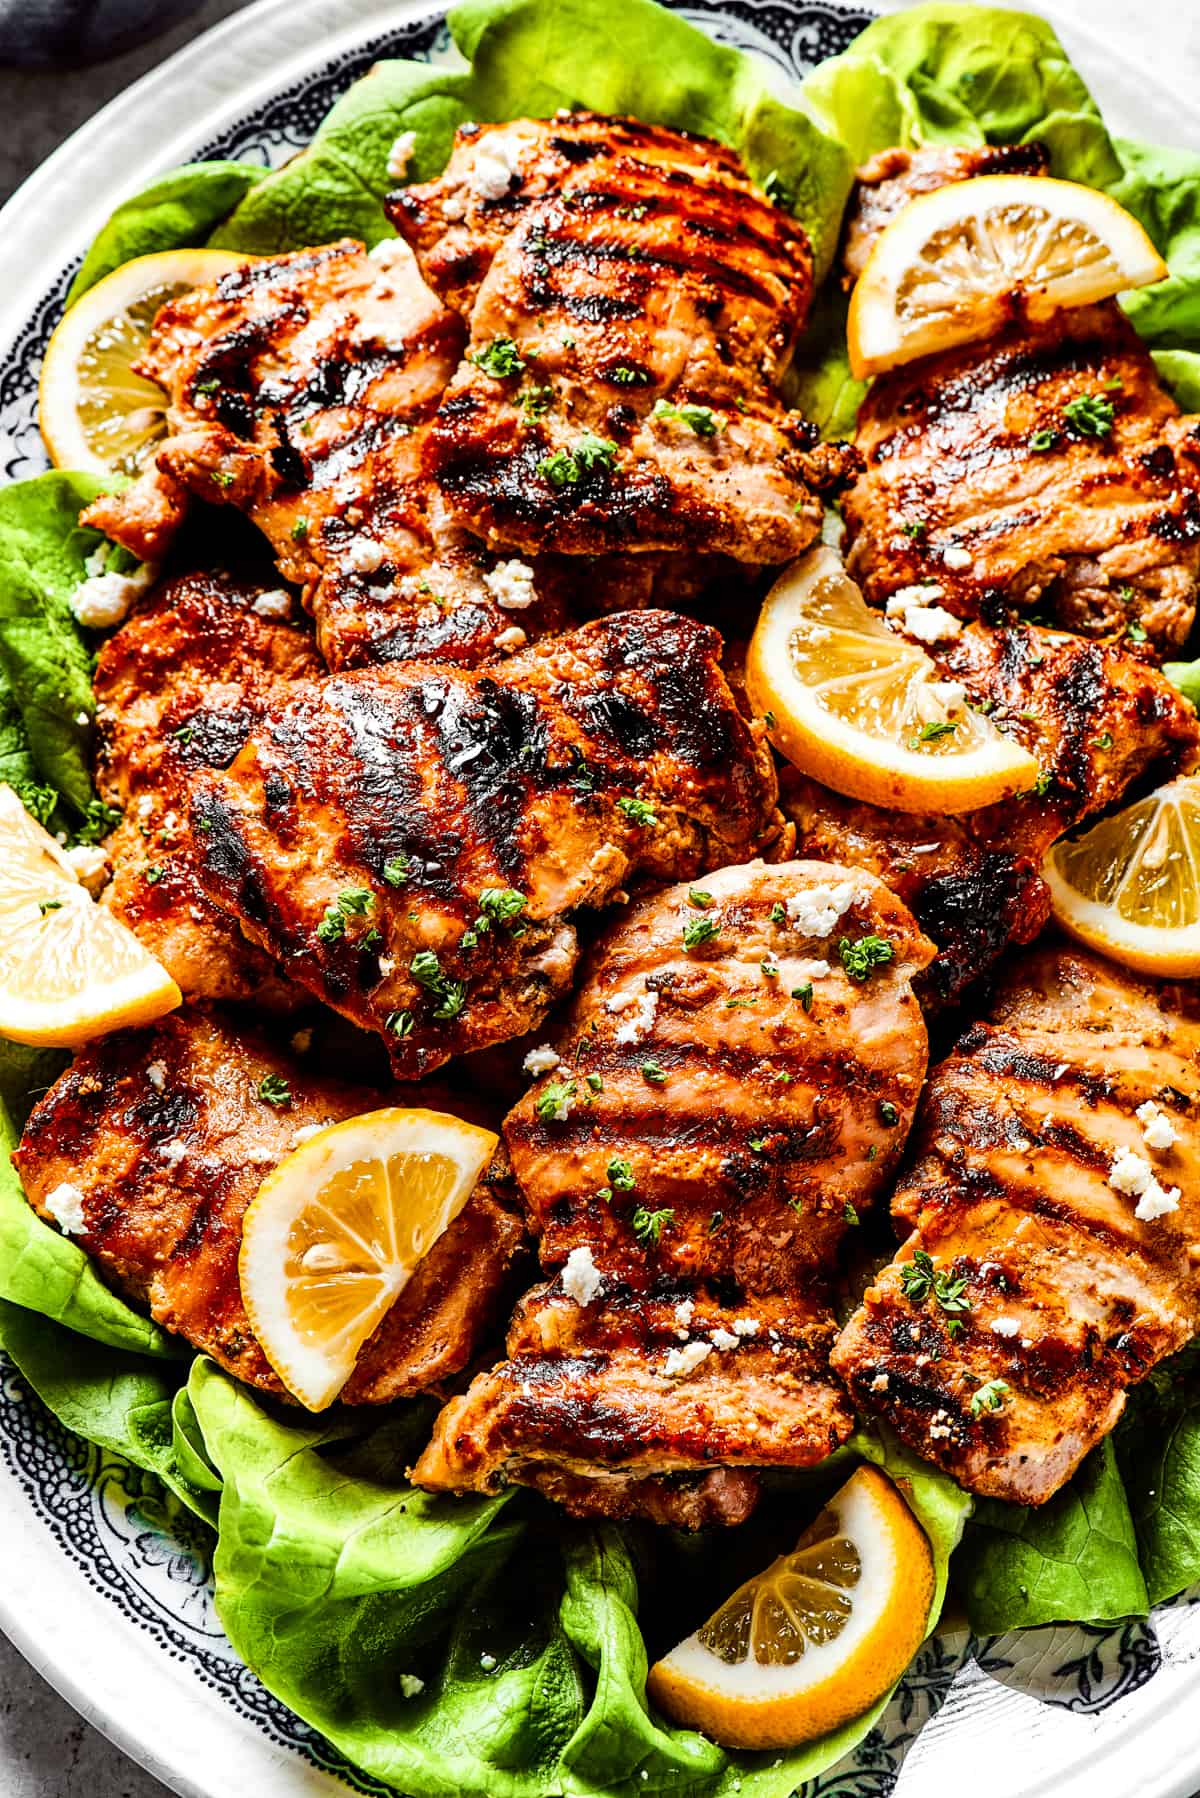 Yogurt-marinated chicken grilled set atop a bed of lettuce leaves and topped with feta cheese.